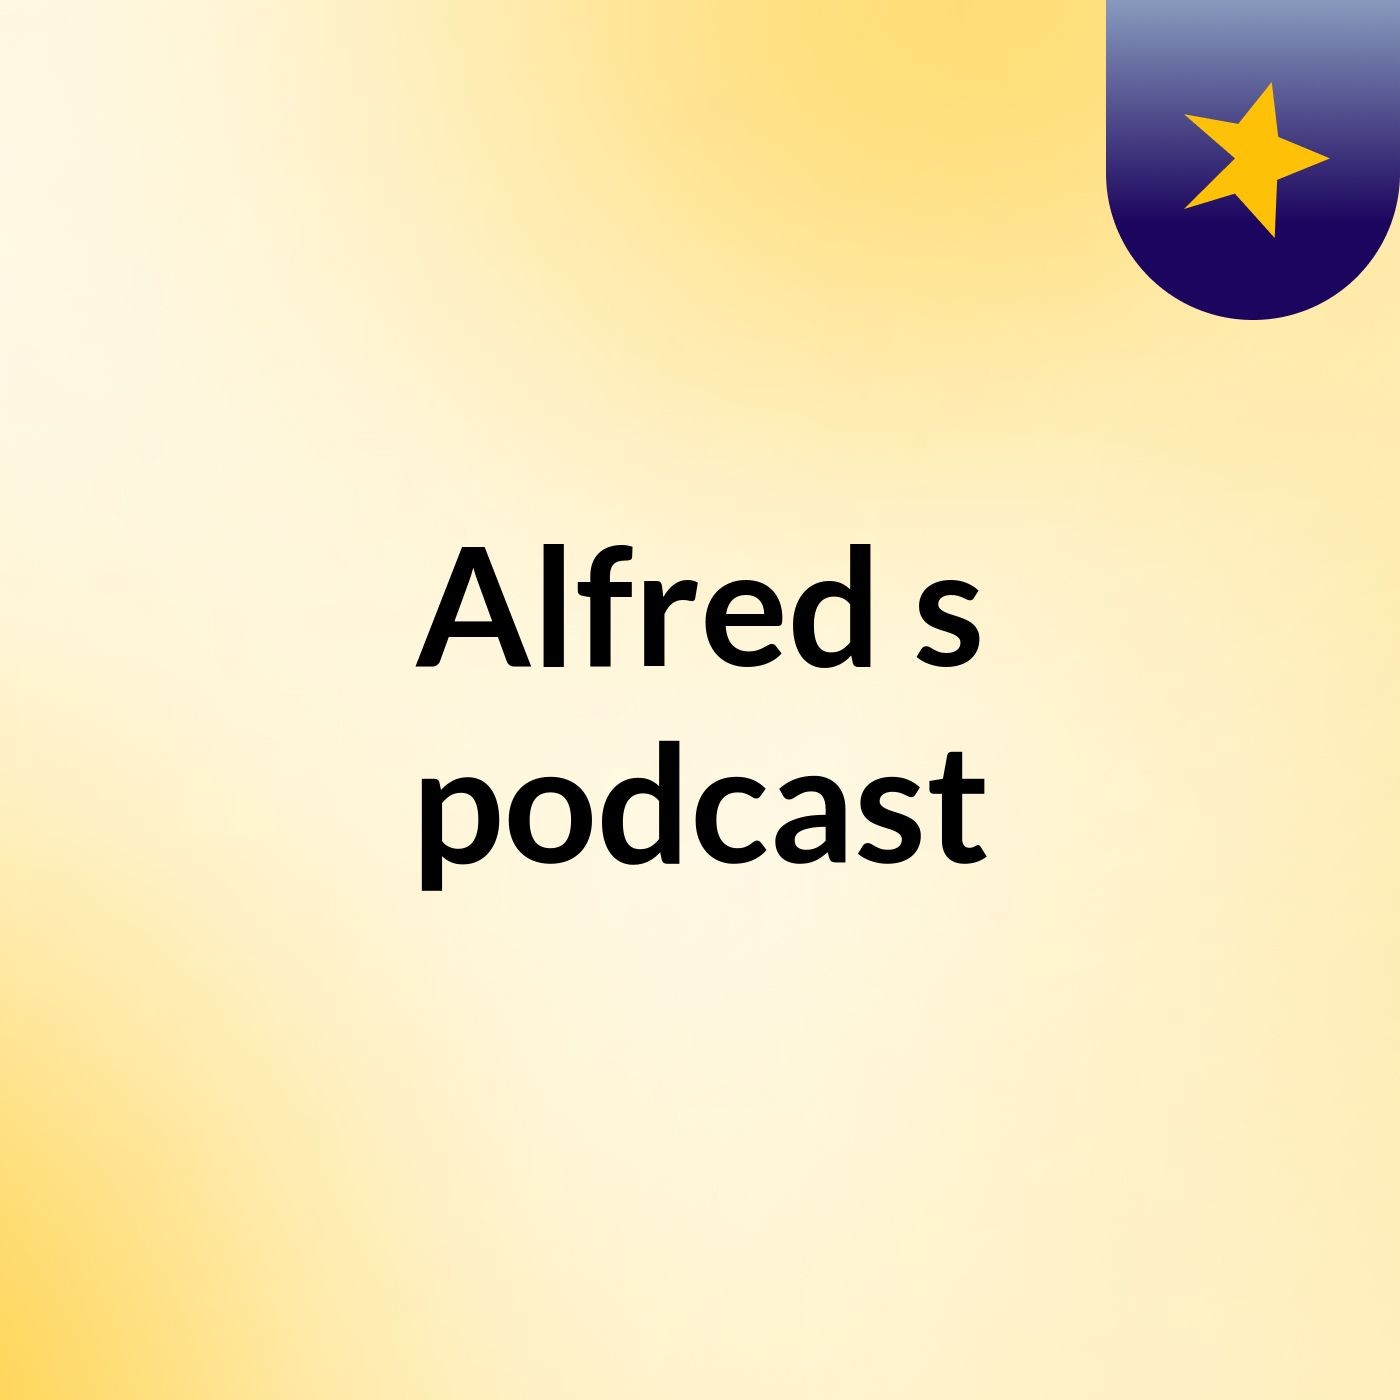 Alfred's podcast